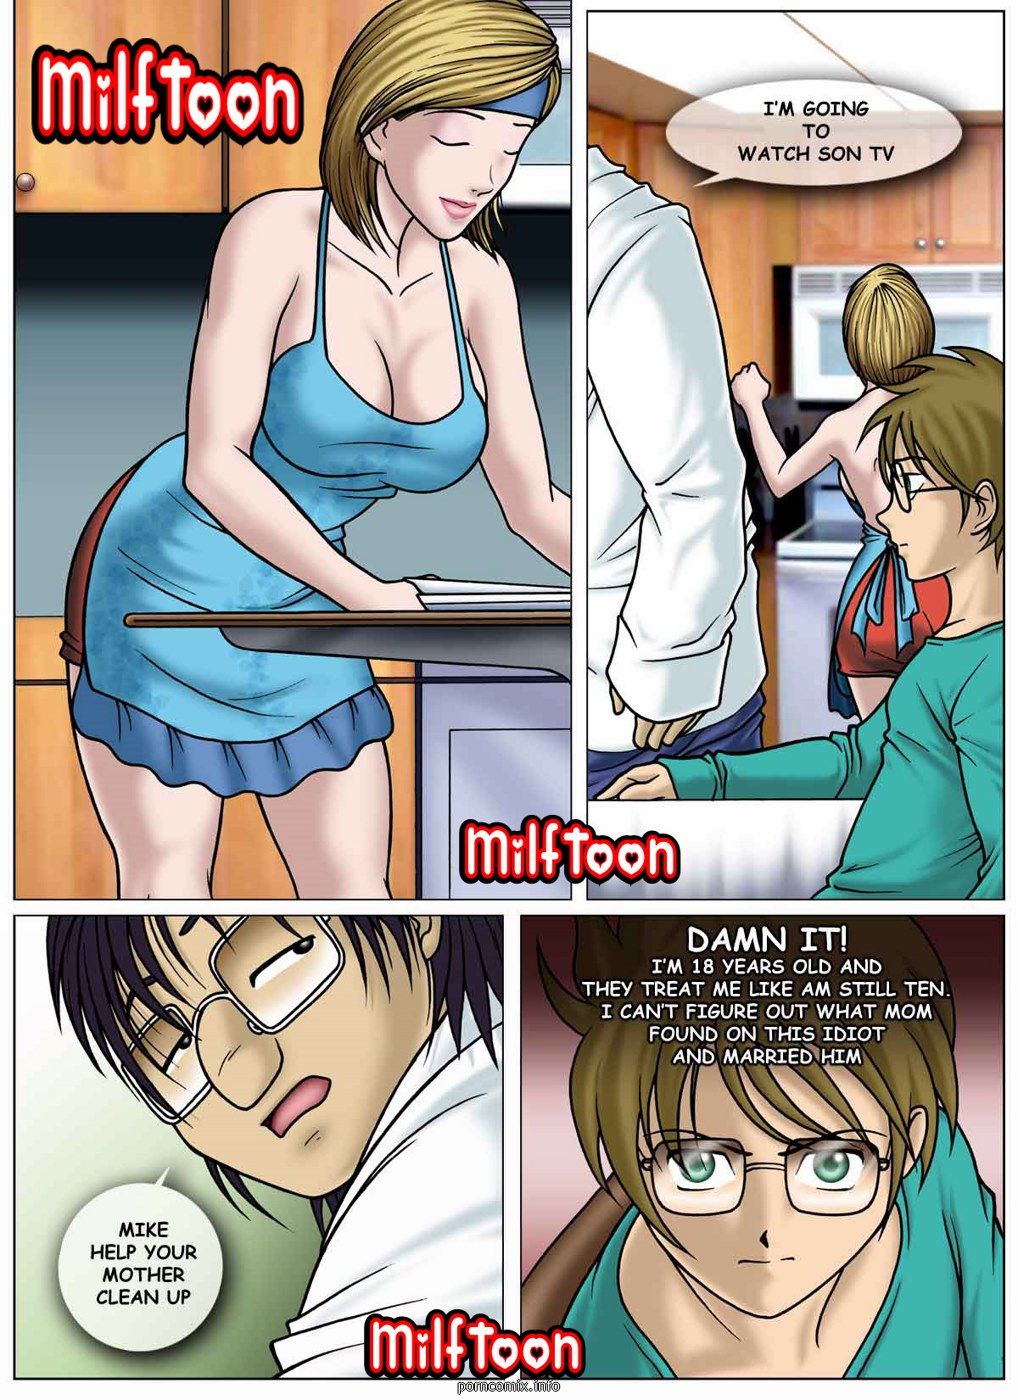 Milftoon - Suprizing page 1